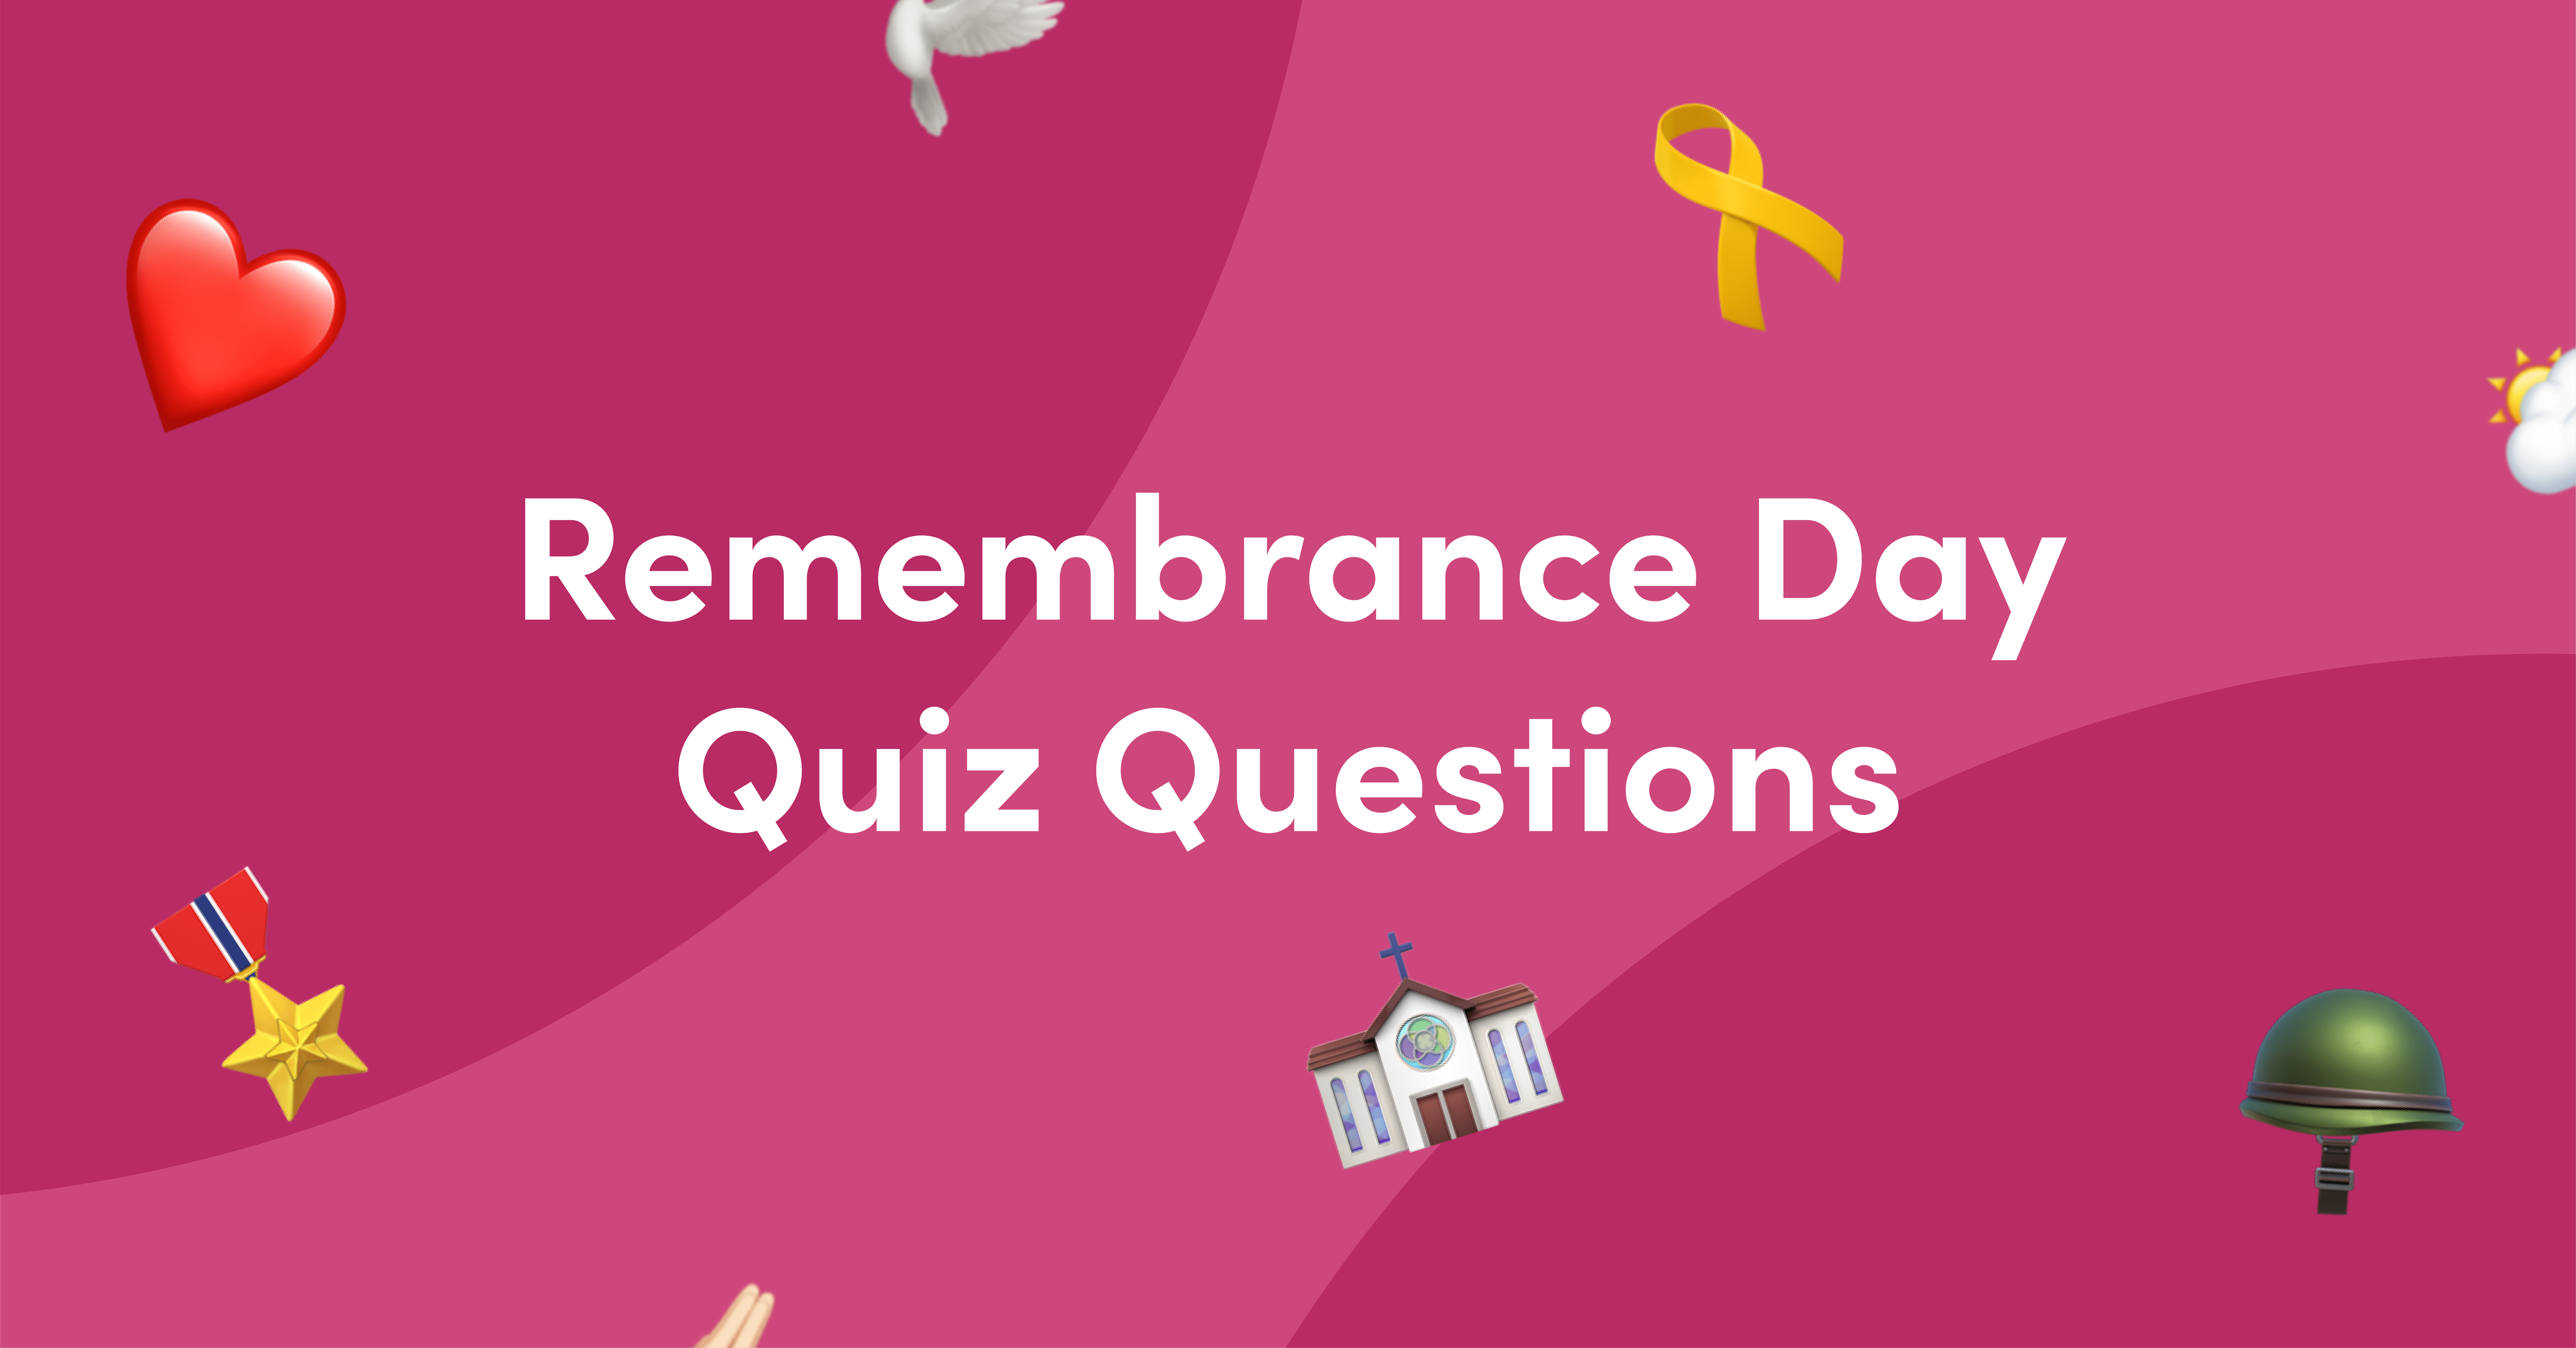 emojis on pink background for Remembrance day quiz questions and answers